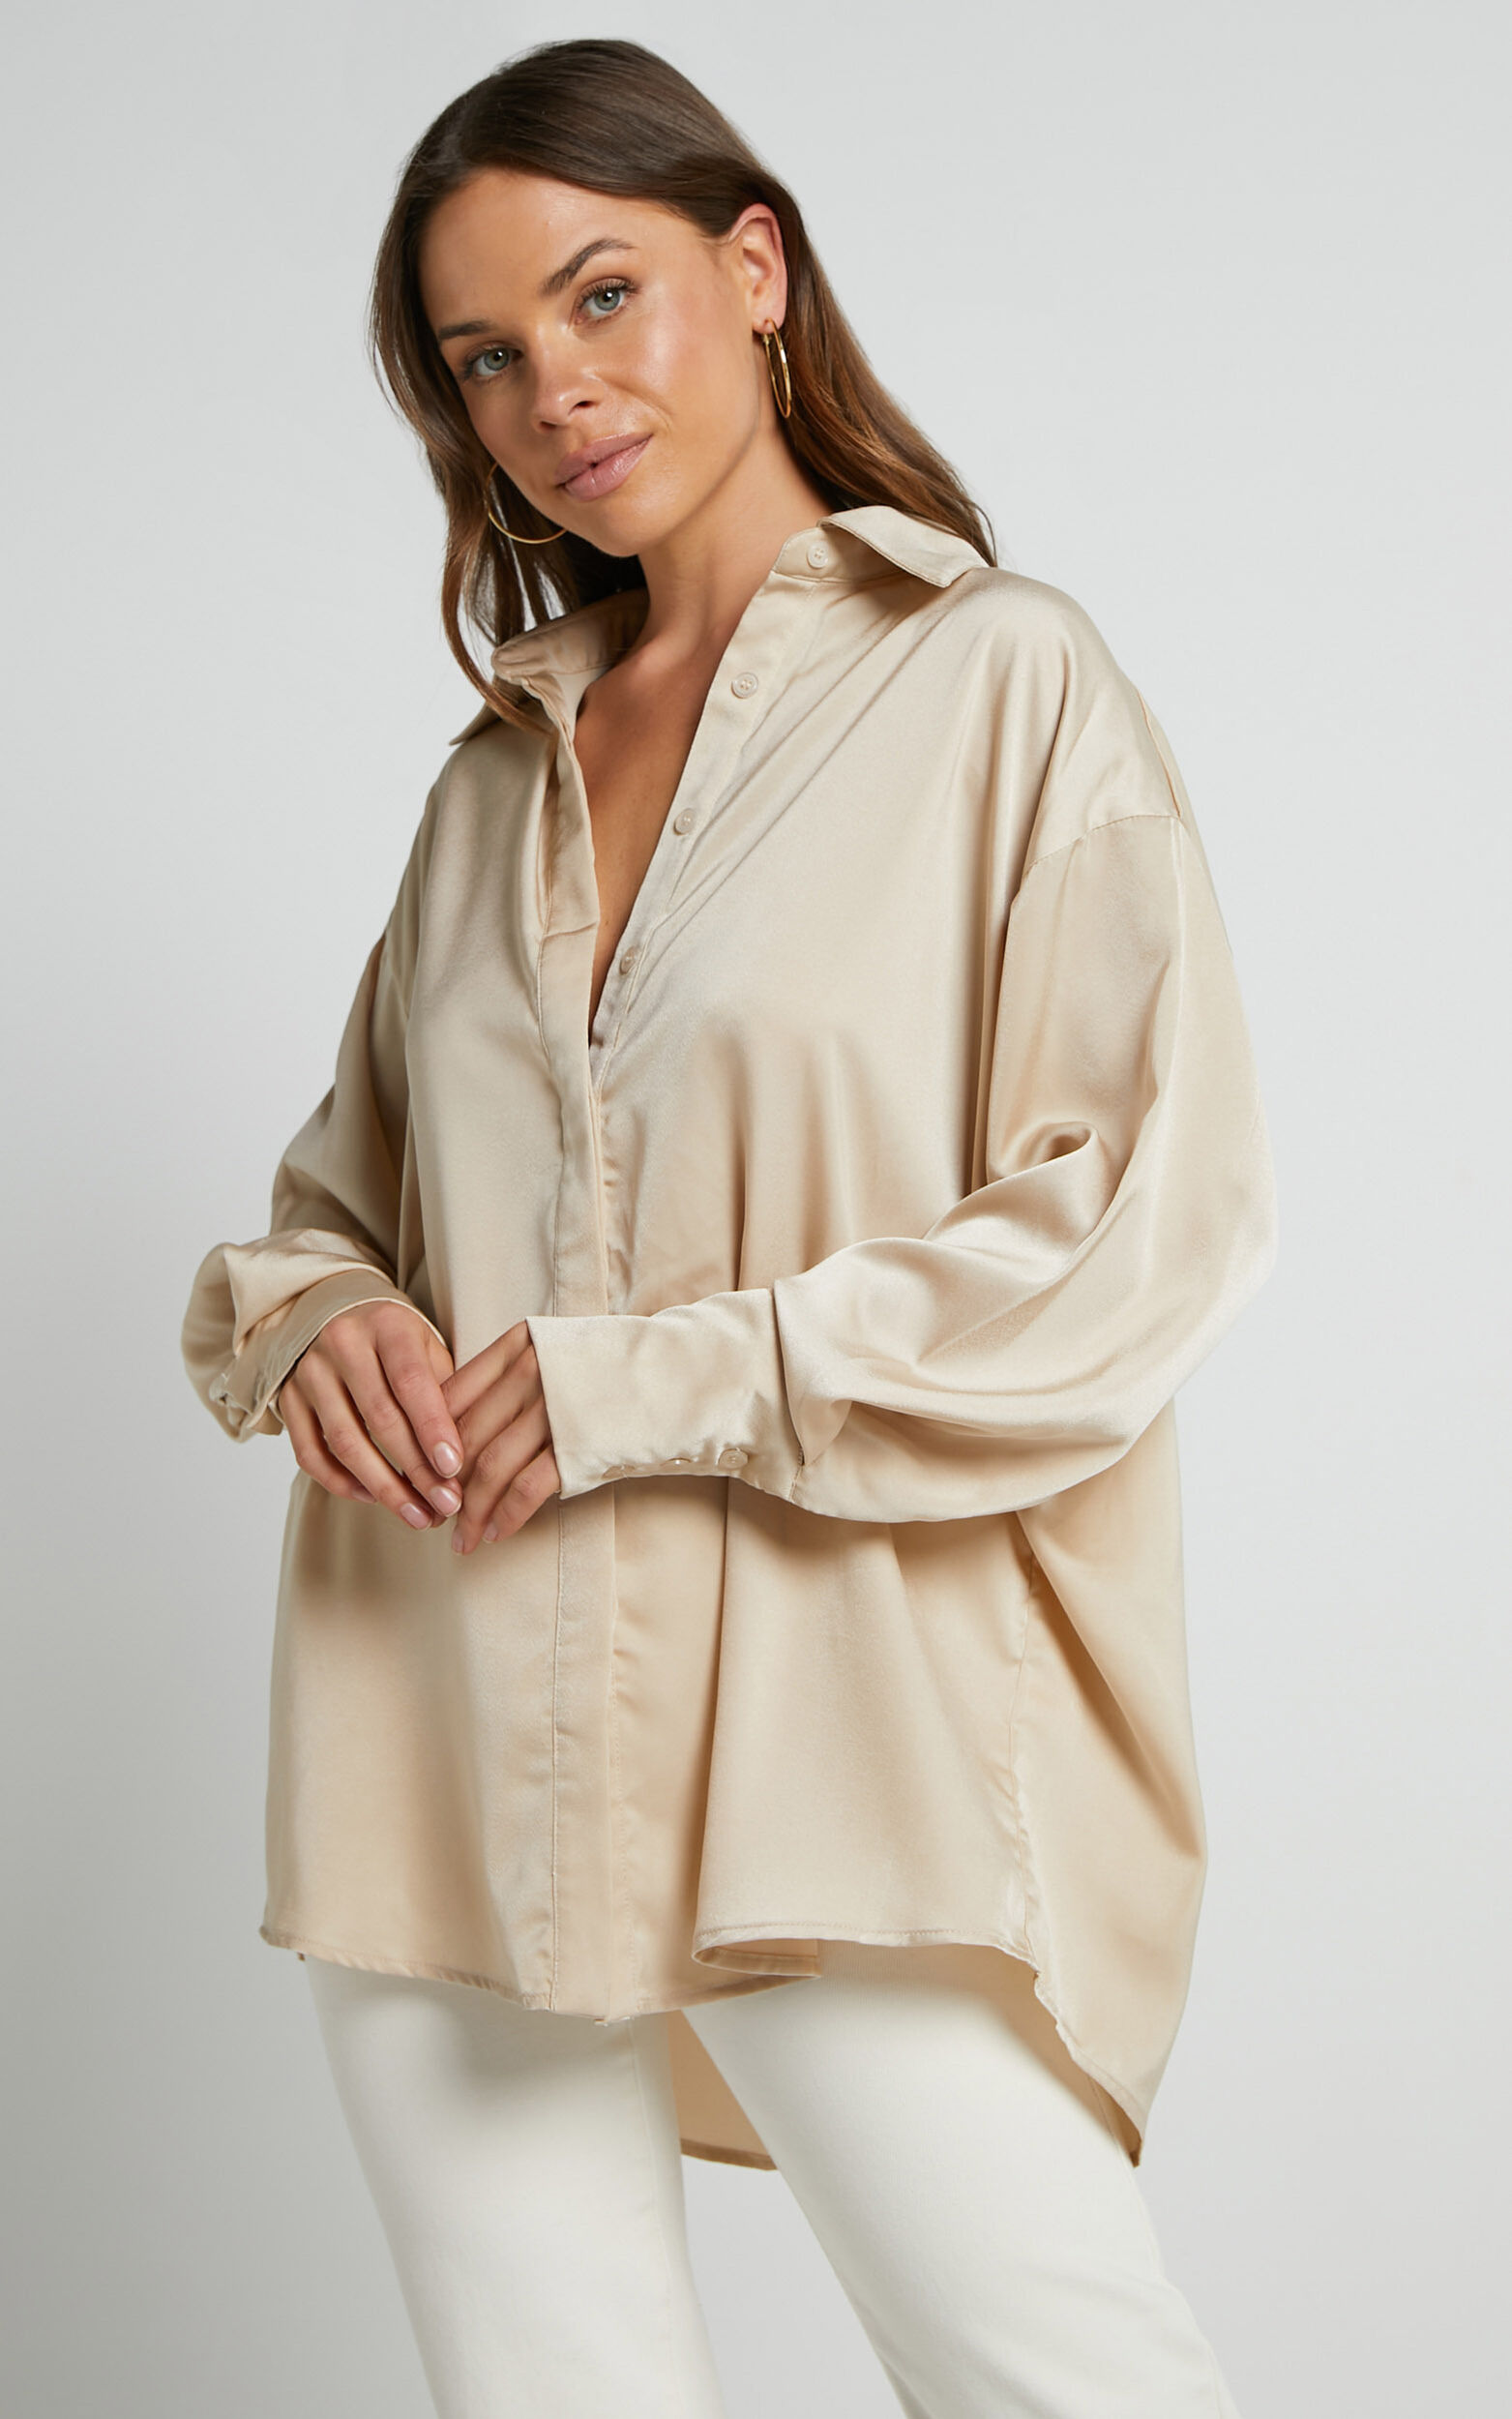 Azurine Shirt - Oversized Button Up Shirt in OYSTER